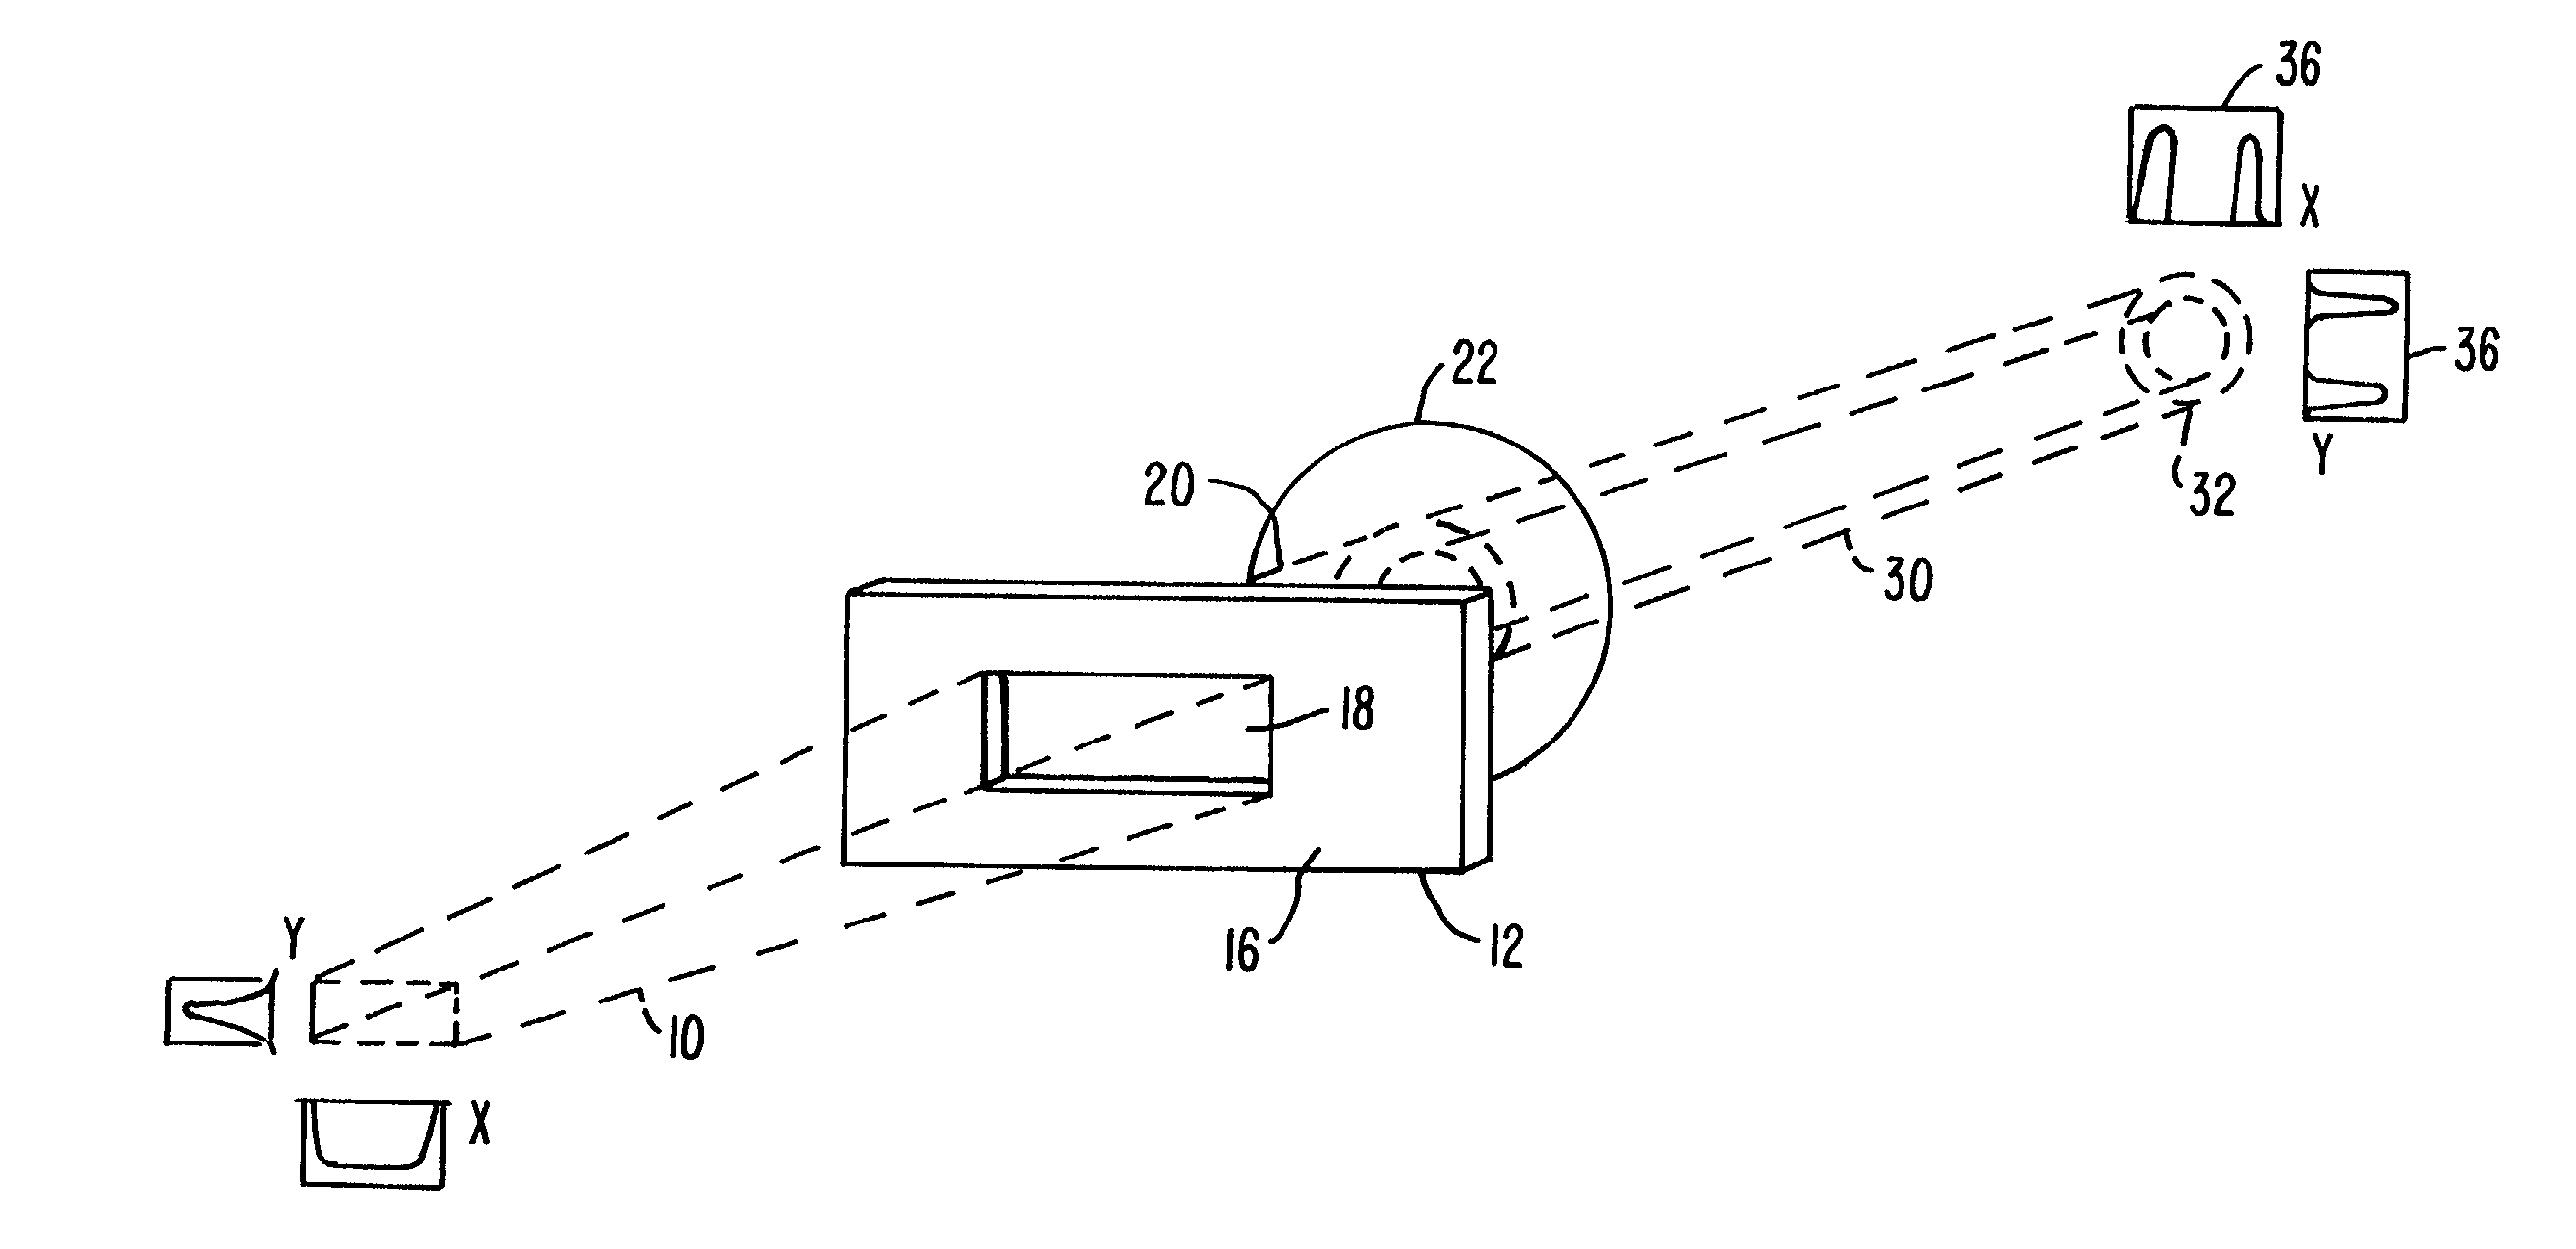 Method and system for scanning non-overlapping patterns of laser energy with diffractive optics